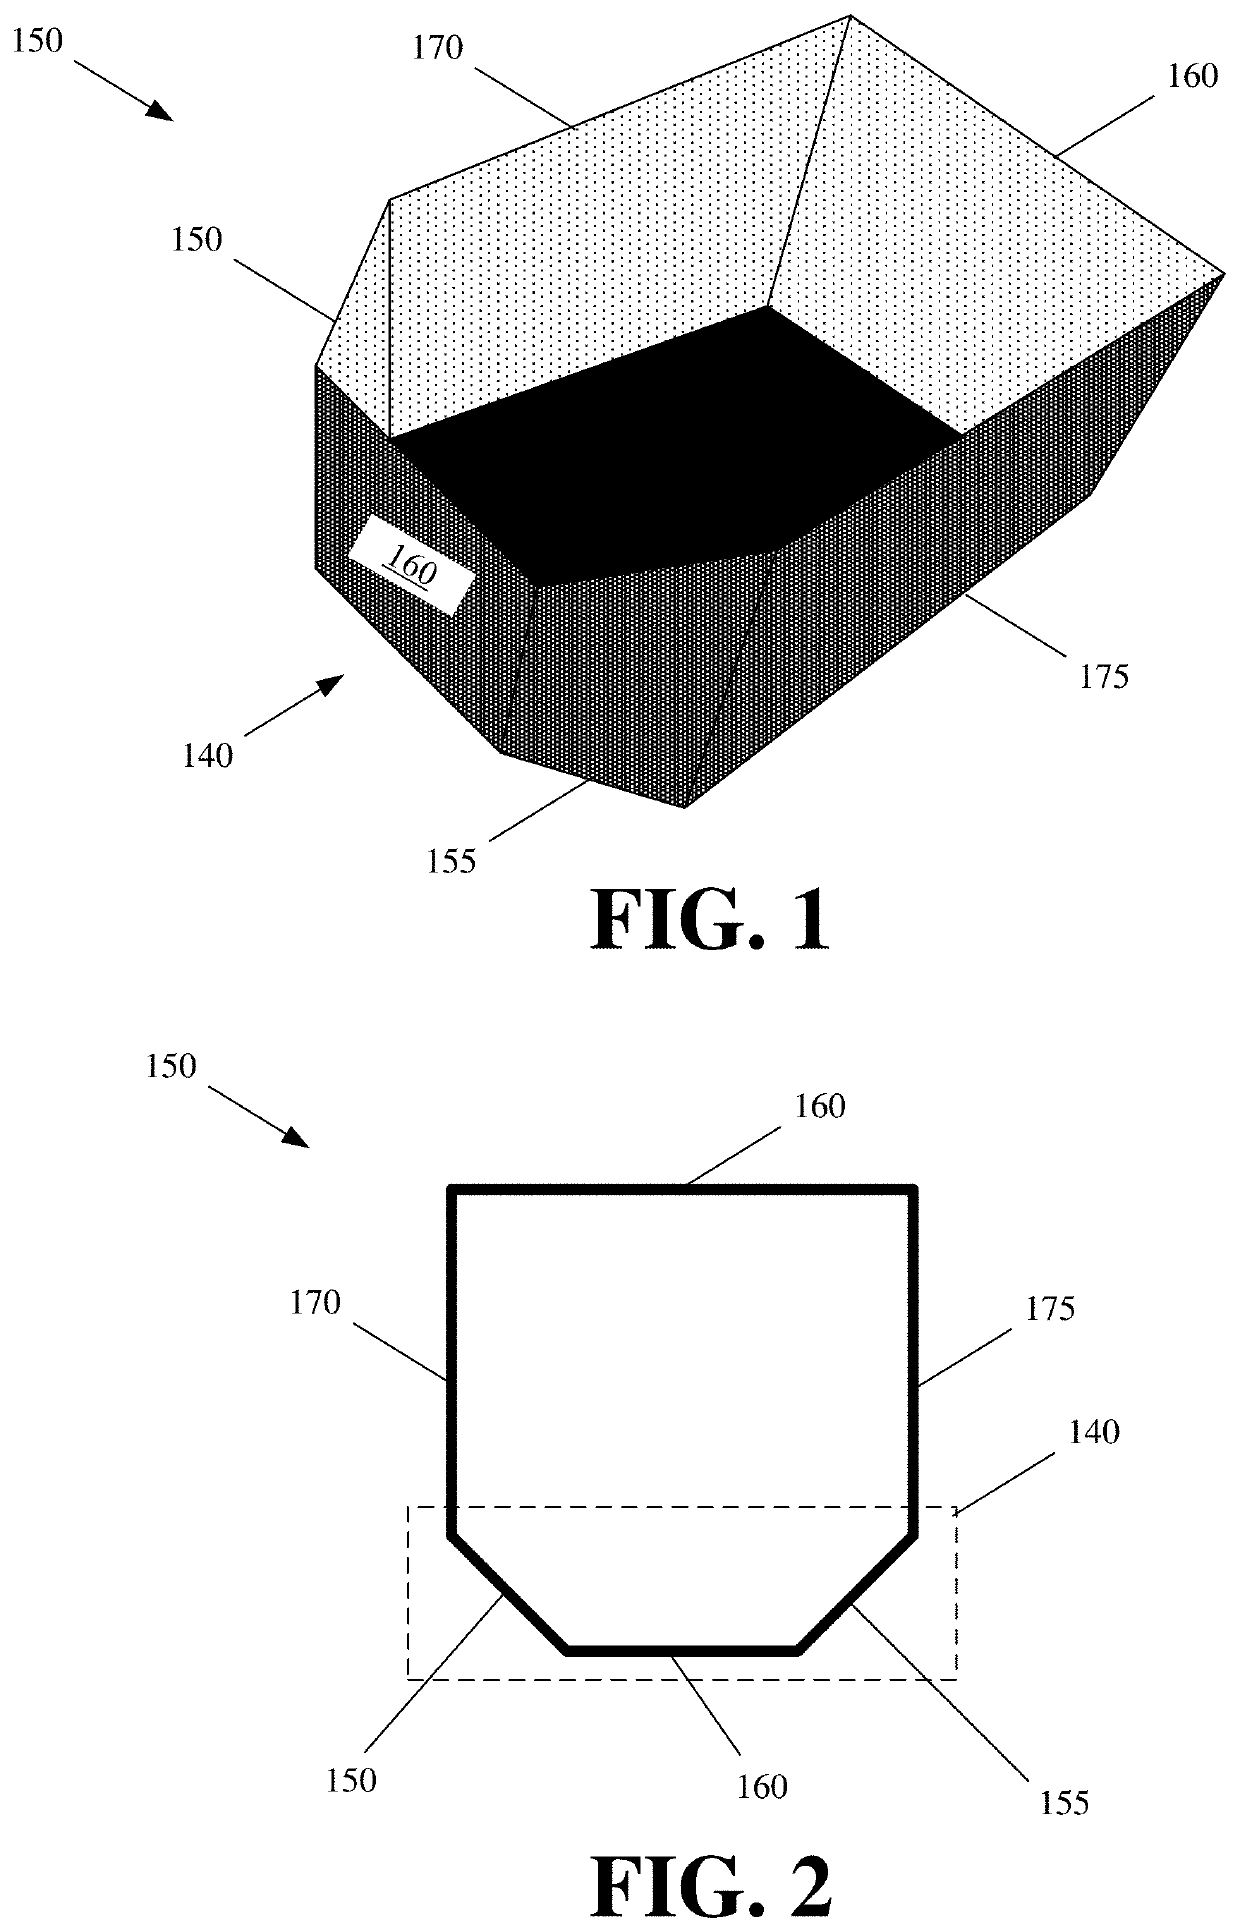 Container with Alignment Correcting End for Misaligned Placement With a Displacing Robotic Element